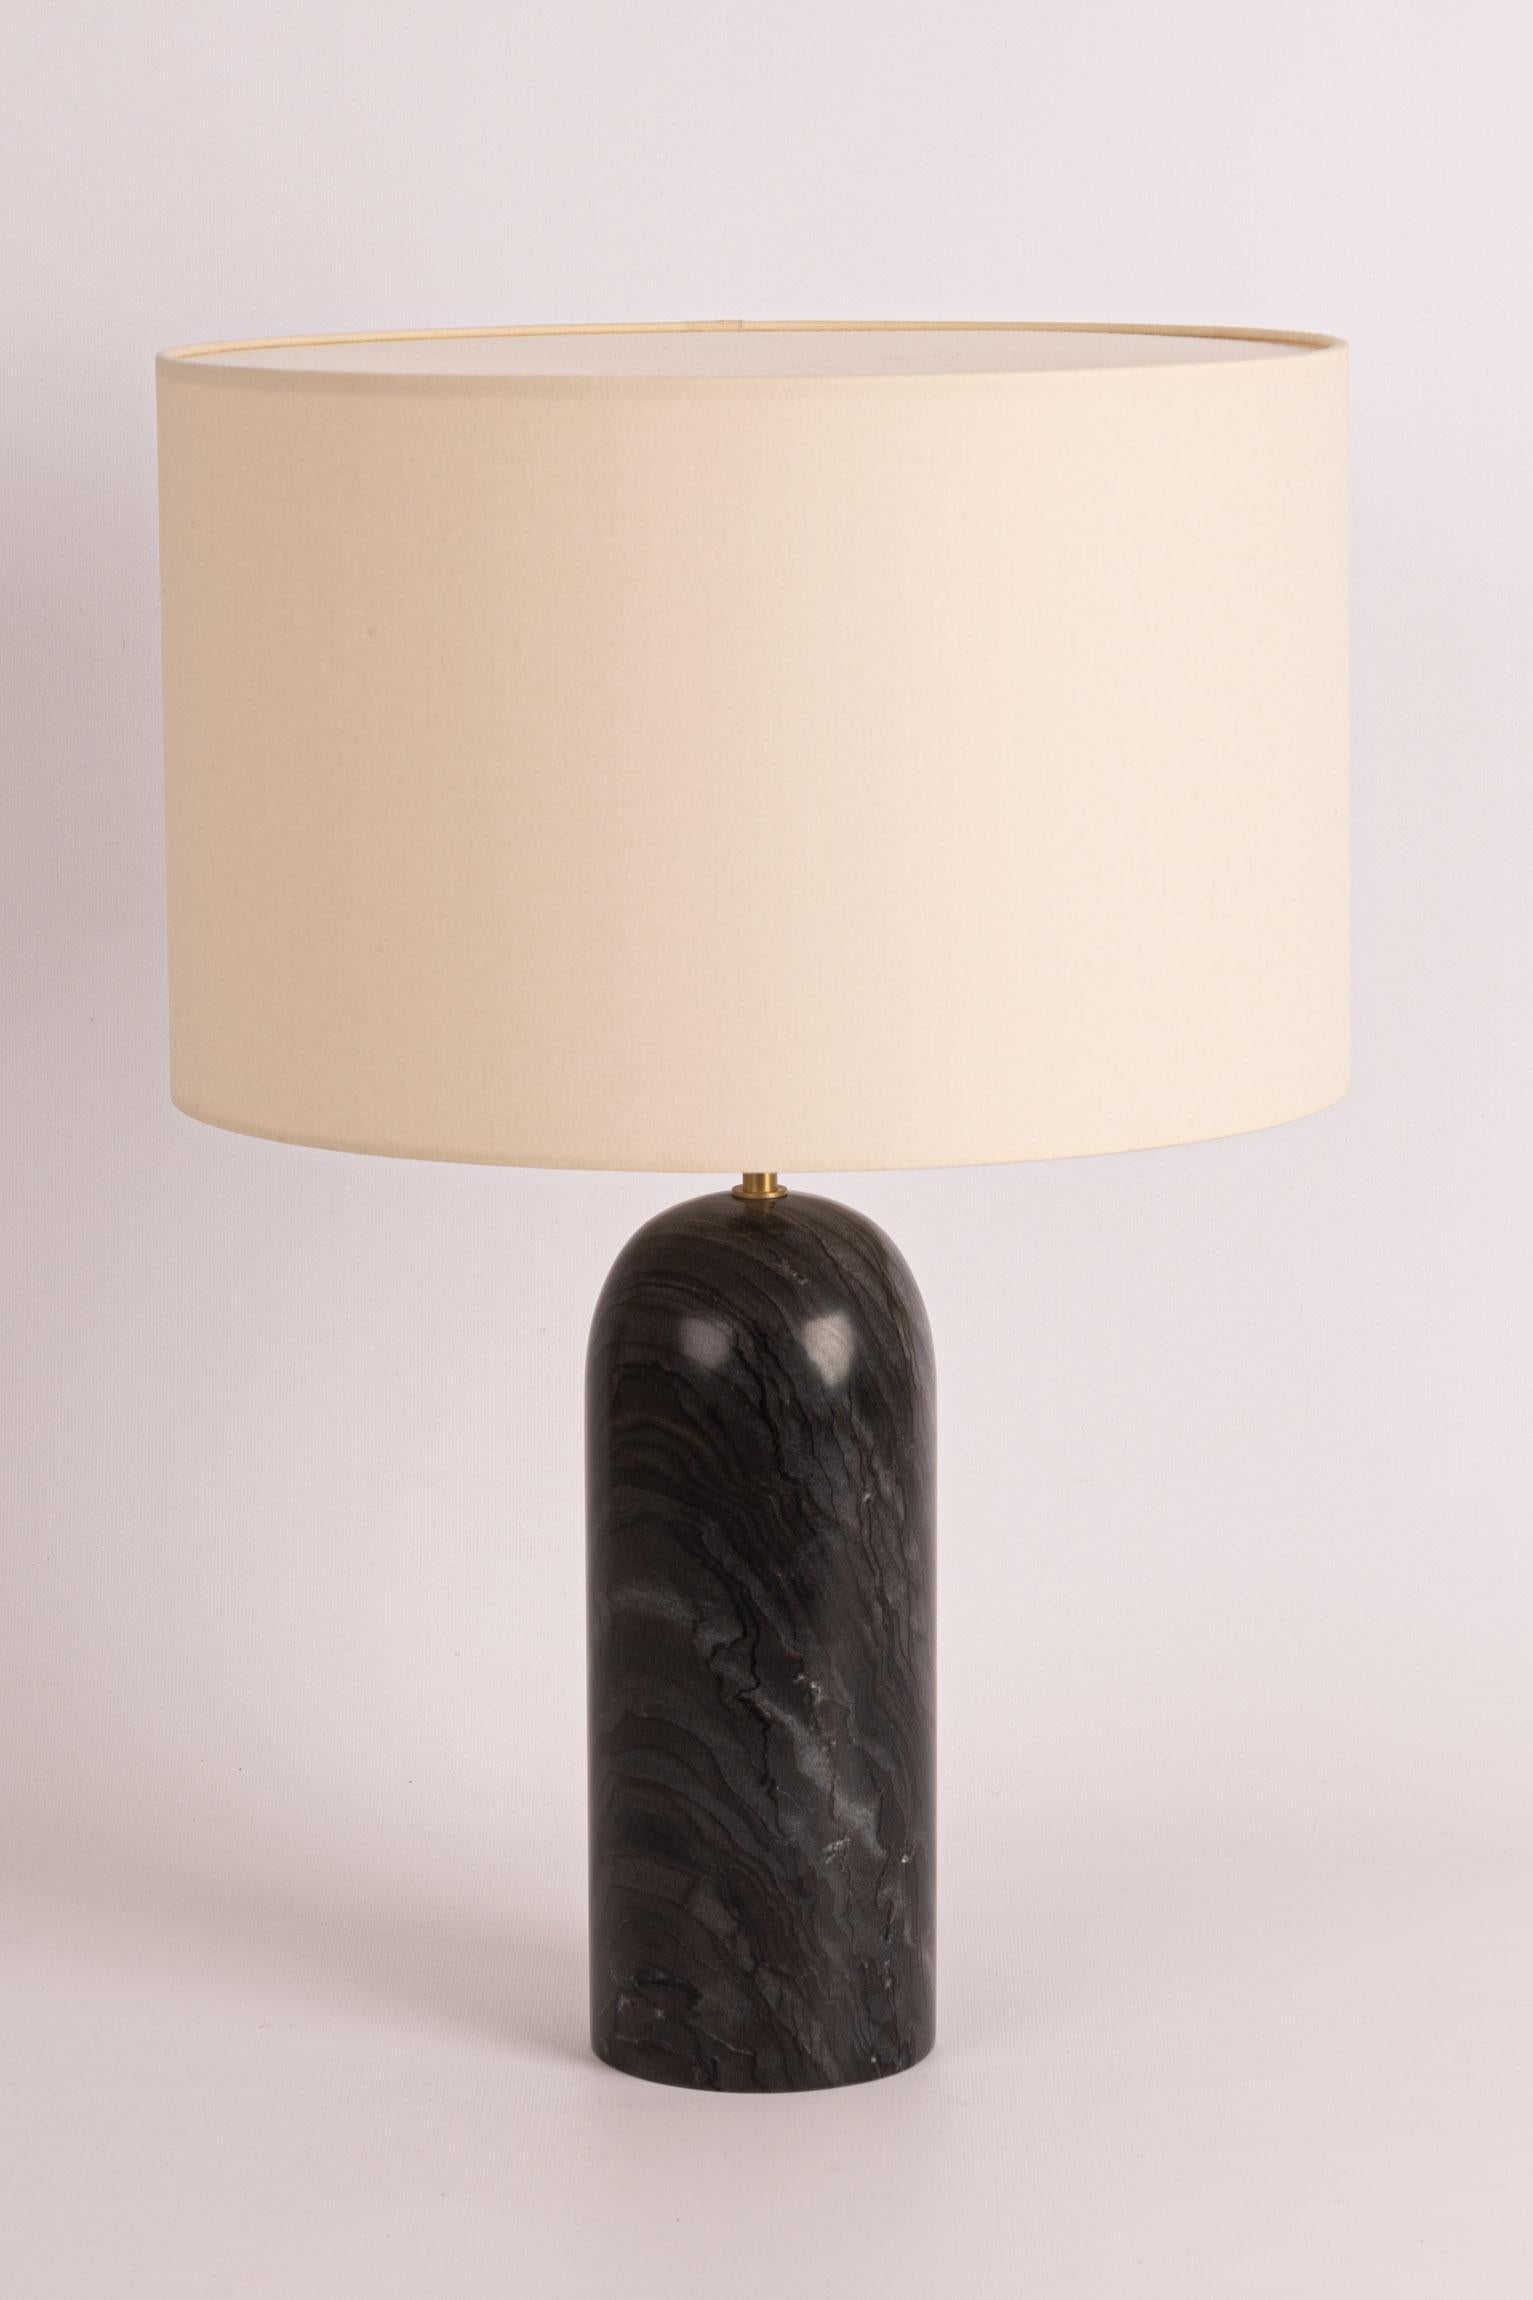 Black Marble Pura Table Lamp by Simone & Marcel
Dimensions: Ø 40 x H 58 cm.
Materials: Brass, cotton and black marble.

Also available in different marble, wood and alabaster options and finishes. Custom options available on request. Please contact